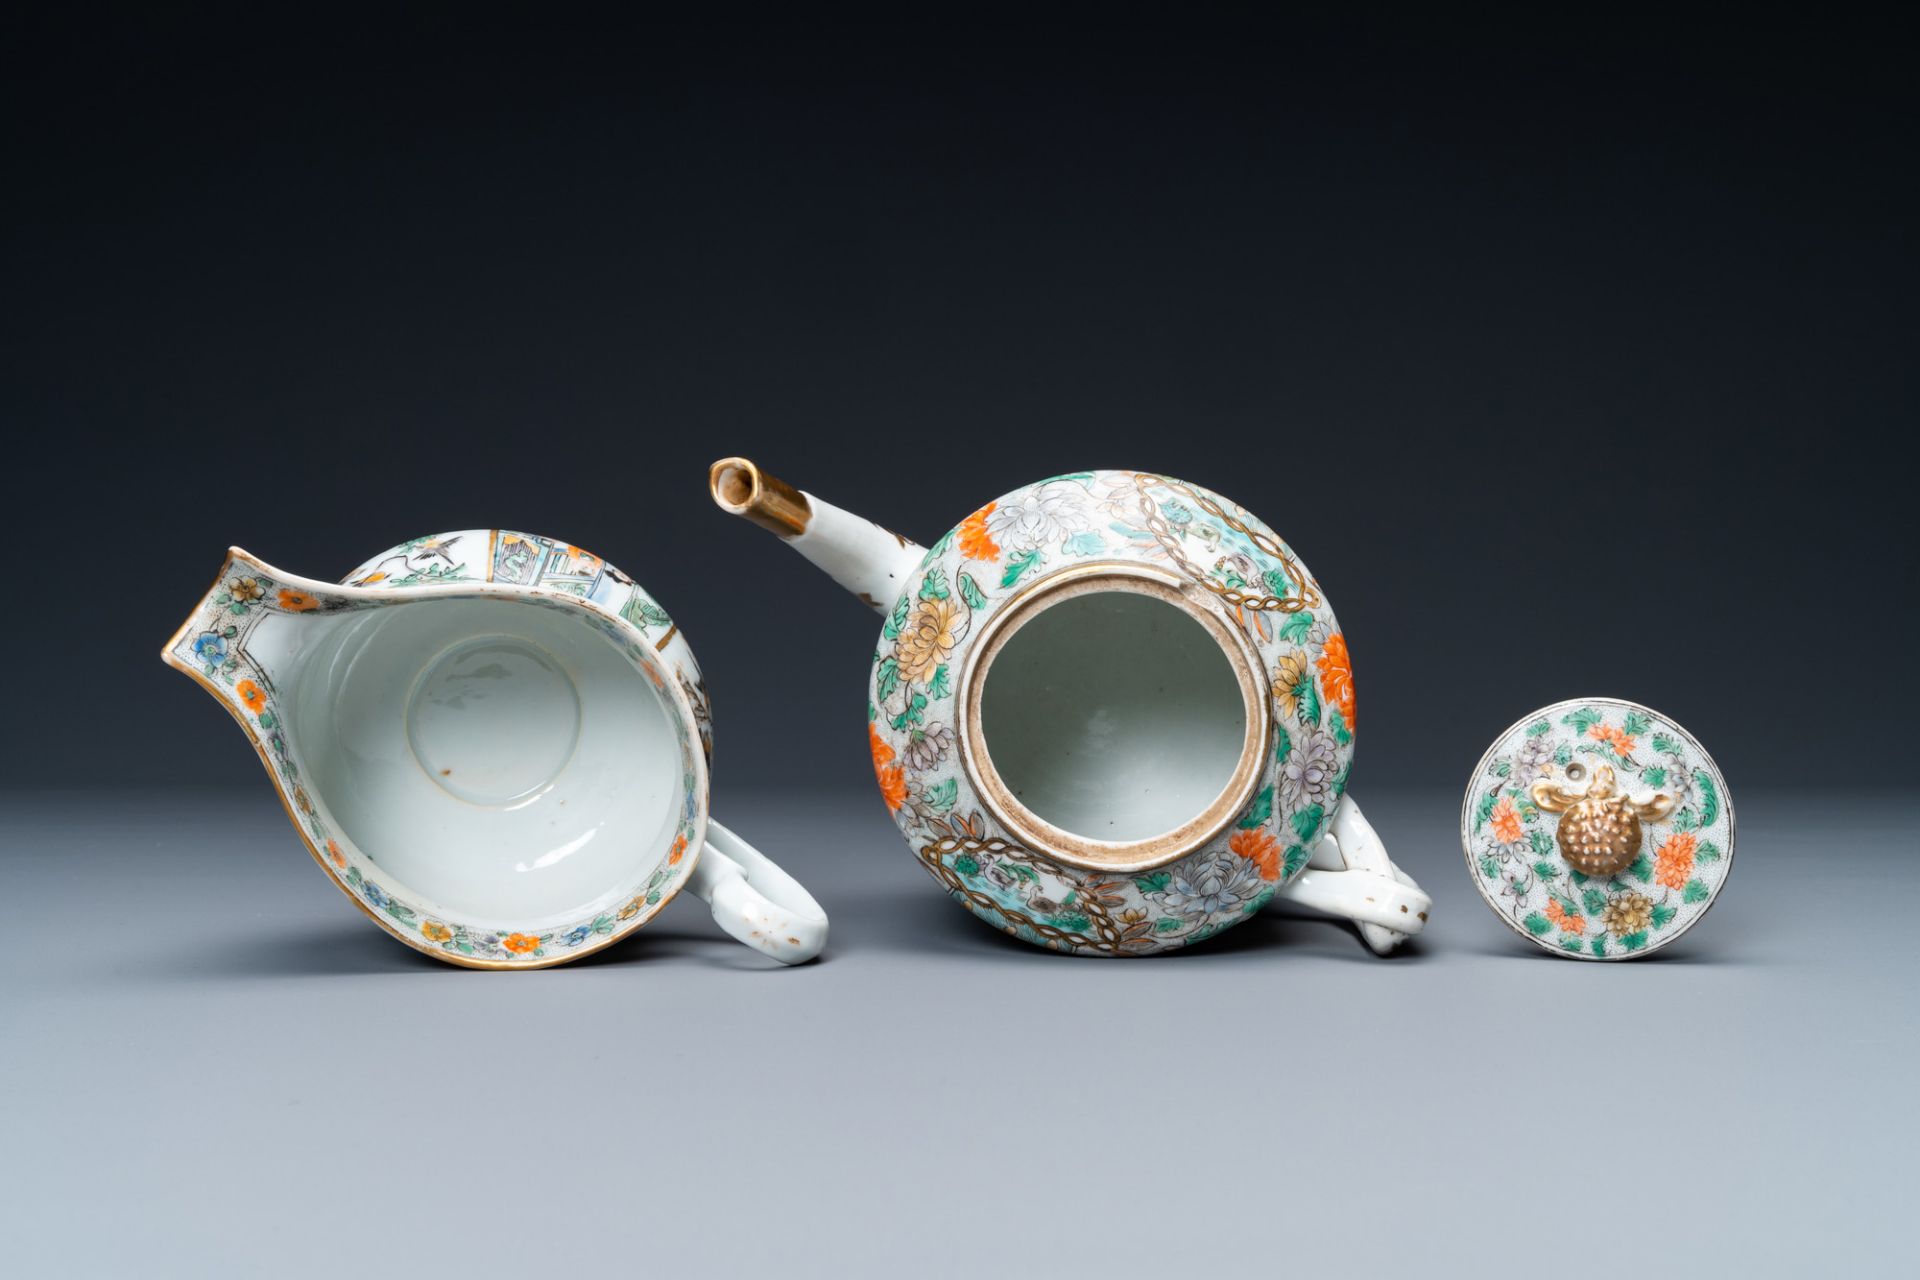 A Chinese Canton famille verte 14-piece tea service in presentation box, 19th C. - Image 20 of 23